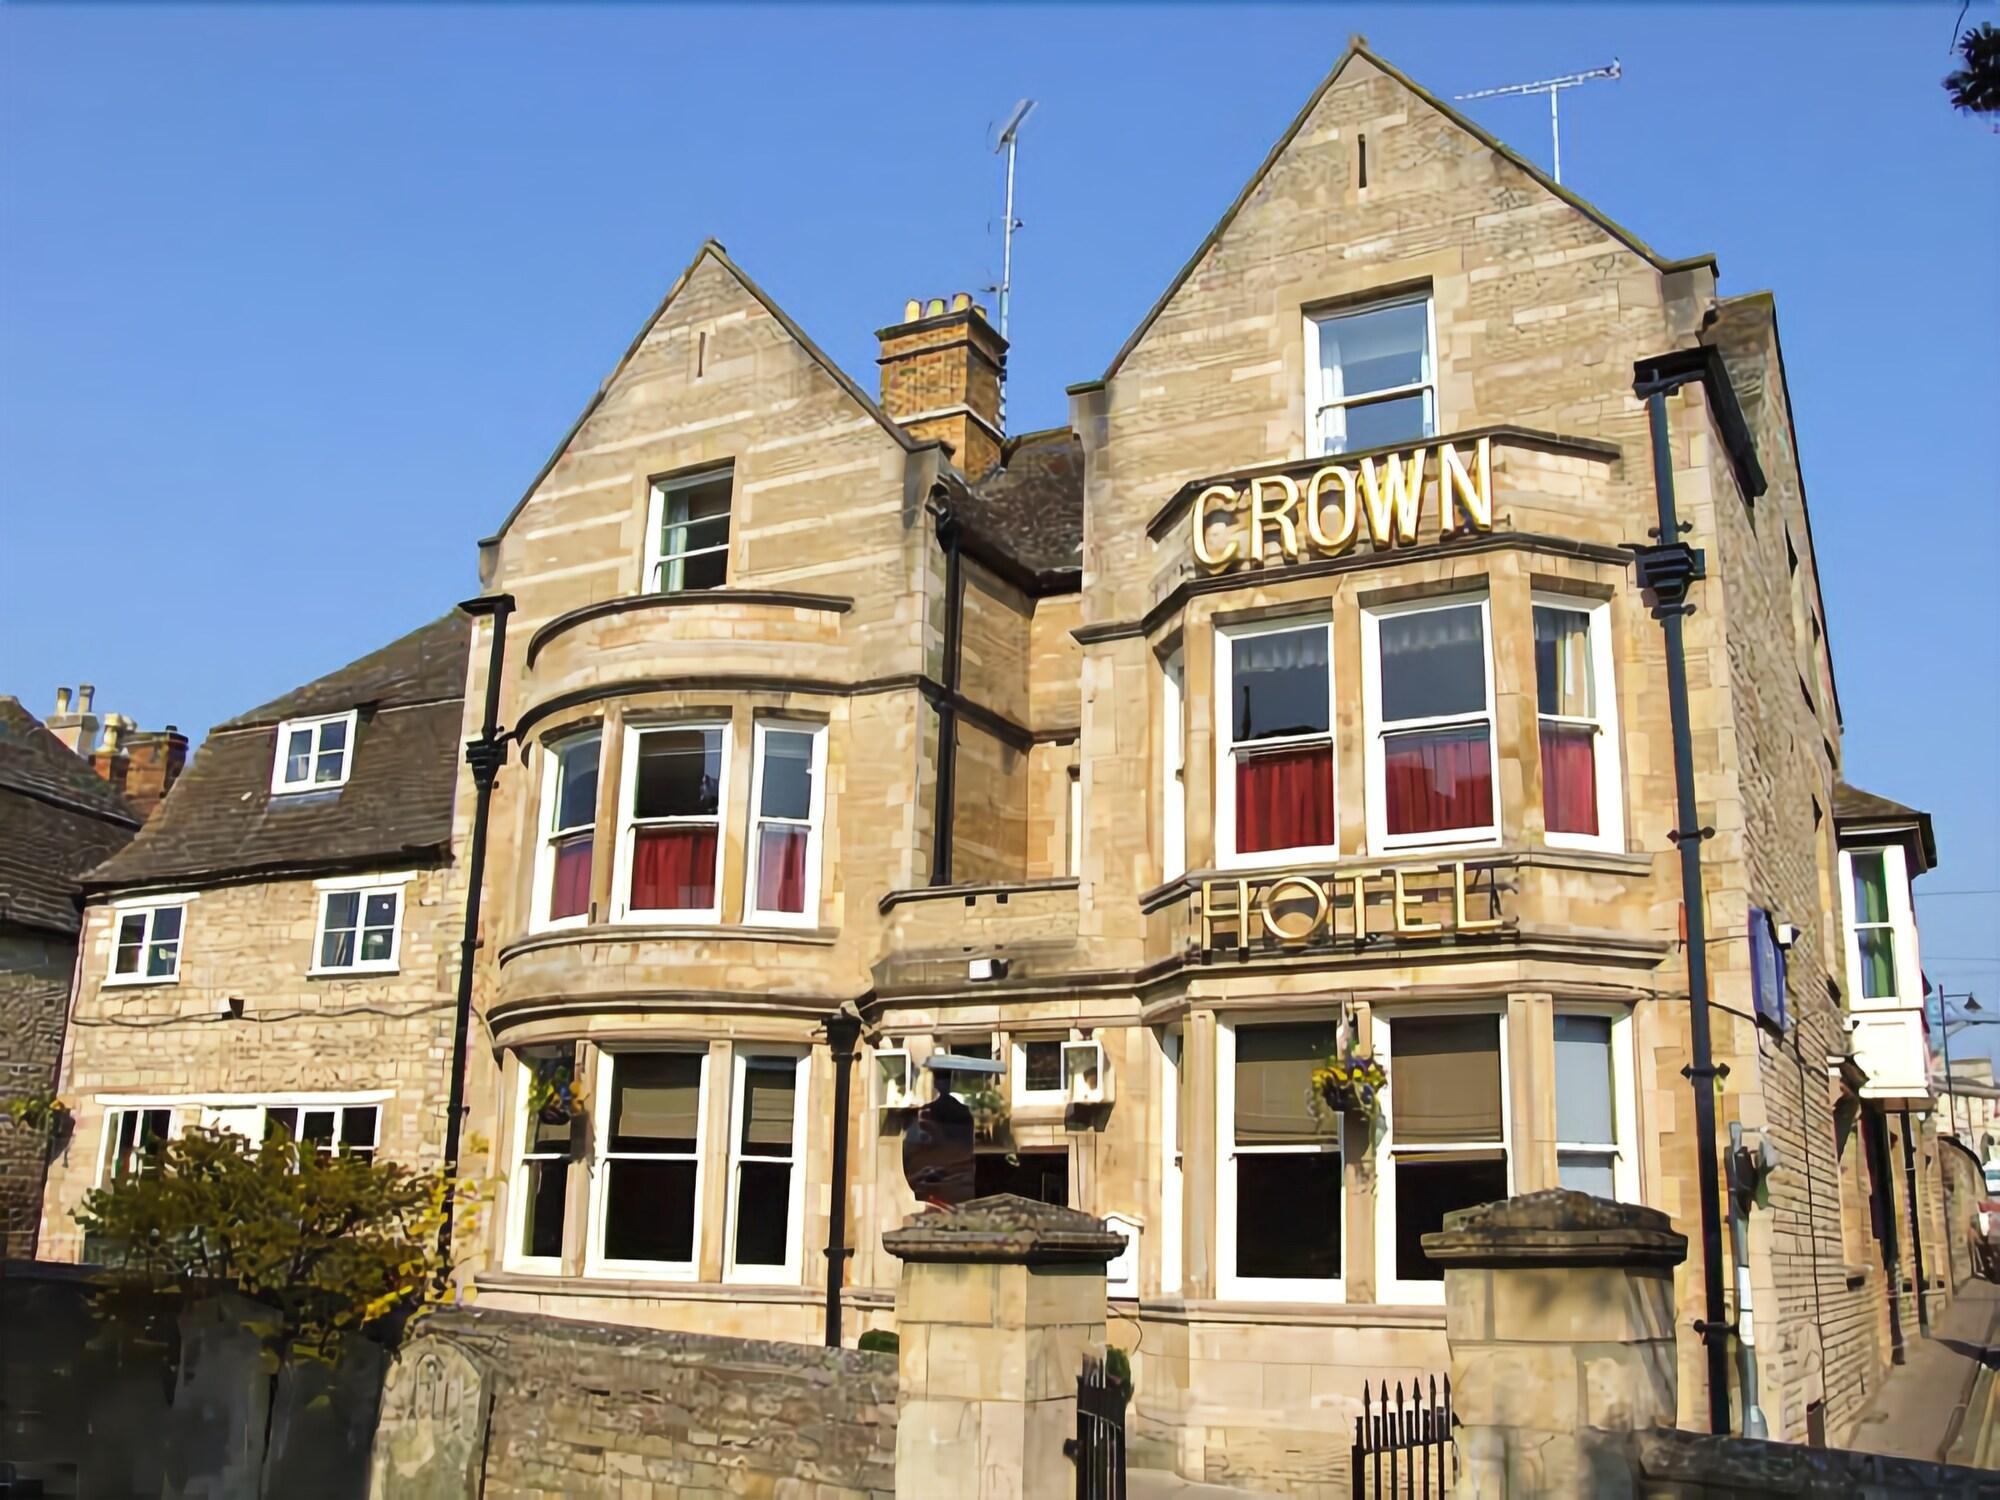 The Crown Hotel image